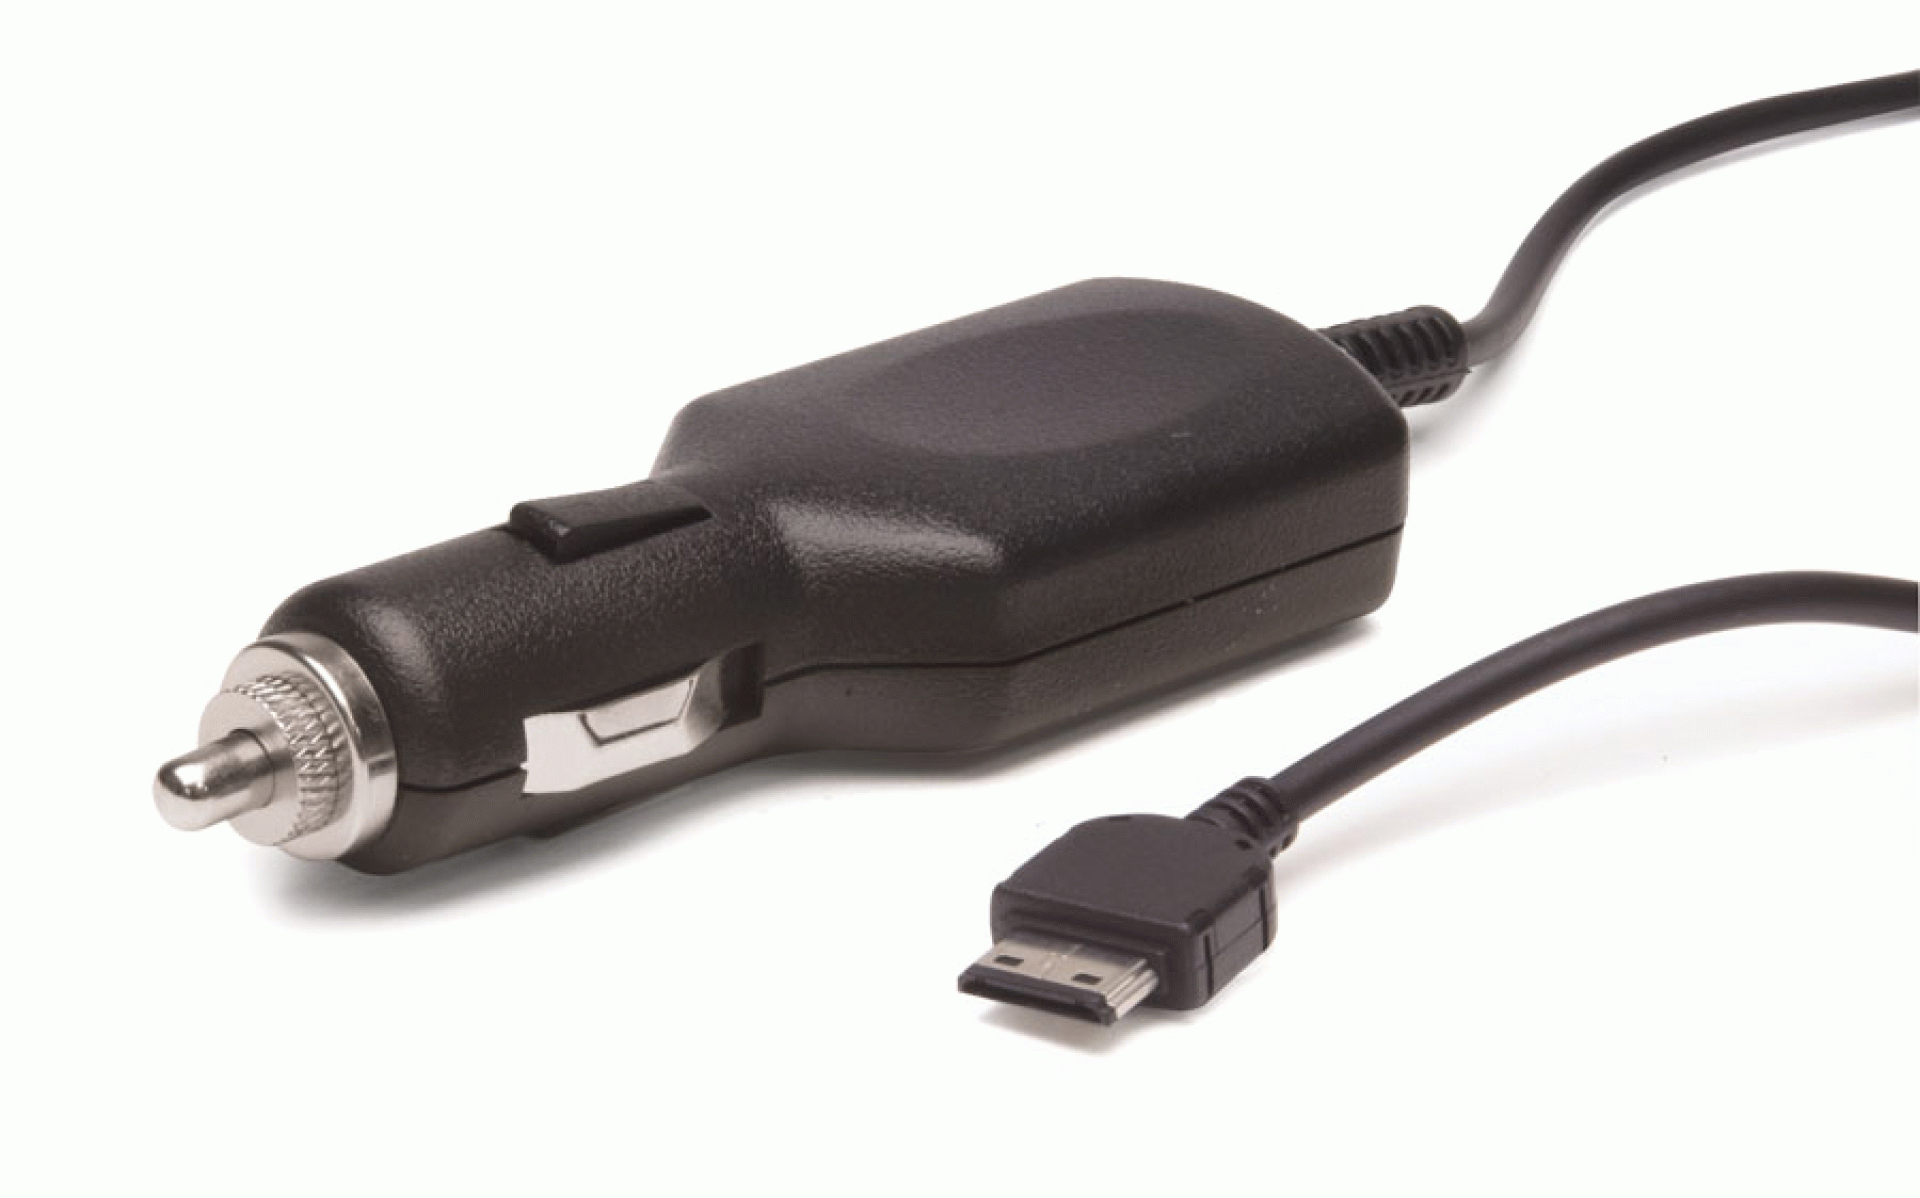 Roadpro Inc. | MSCVCM510 | Cell Phone Vehicle Charger - Samsung M510